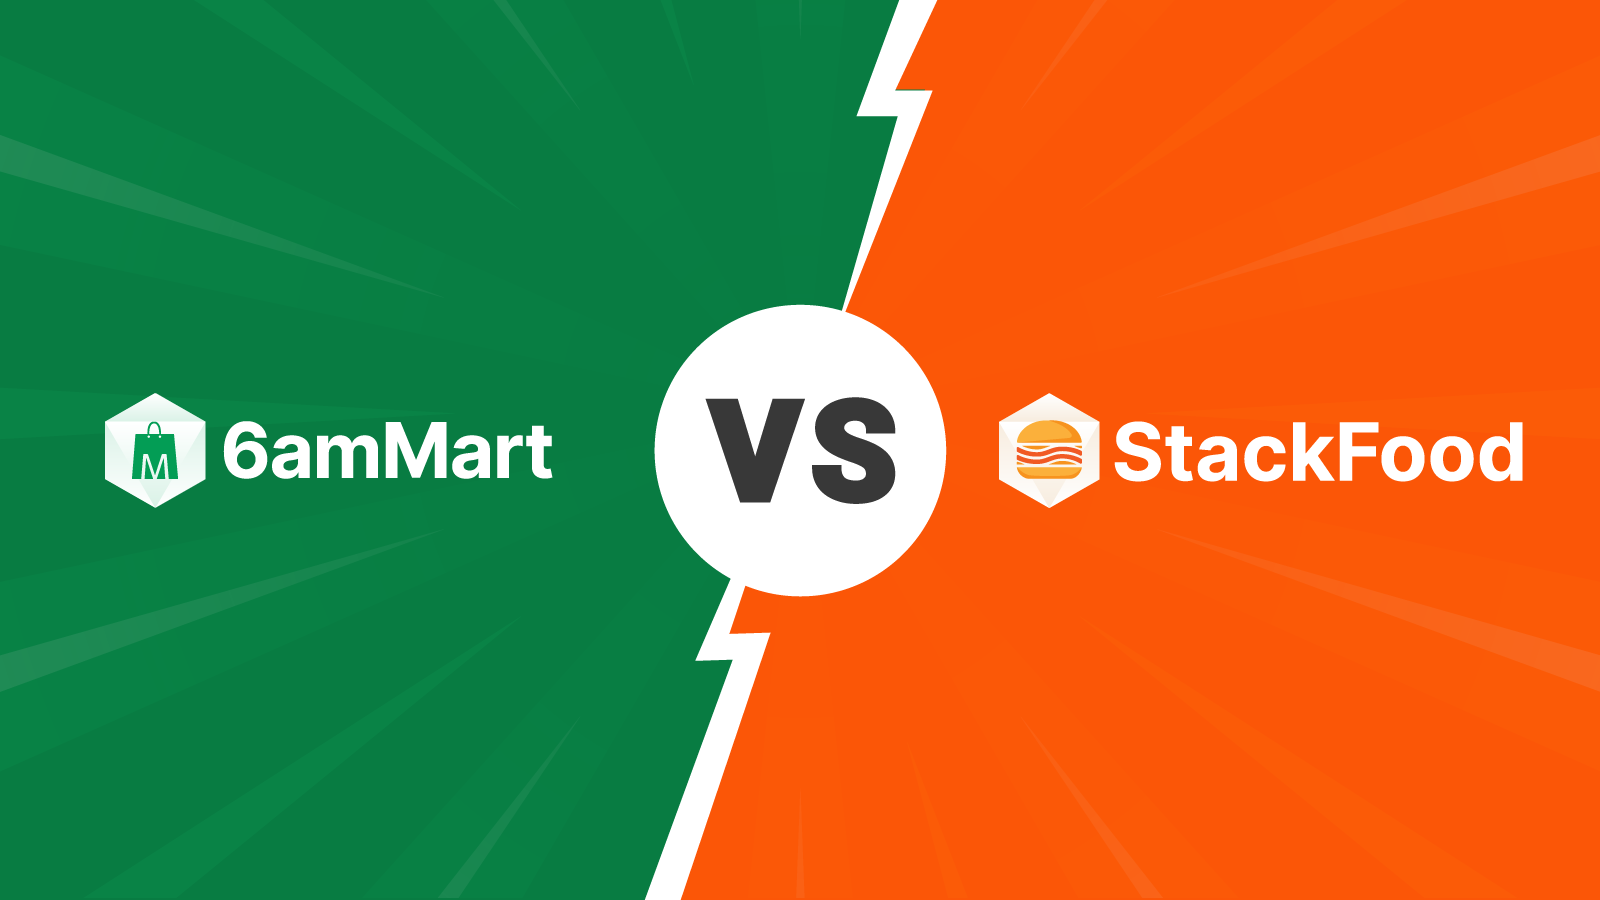 6amMart vs. StackFood: Which is Suitable for Your eCommerce Business